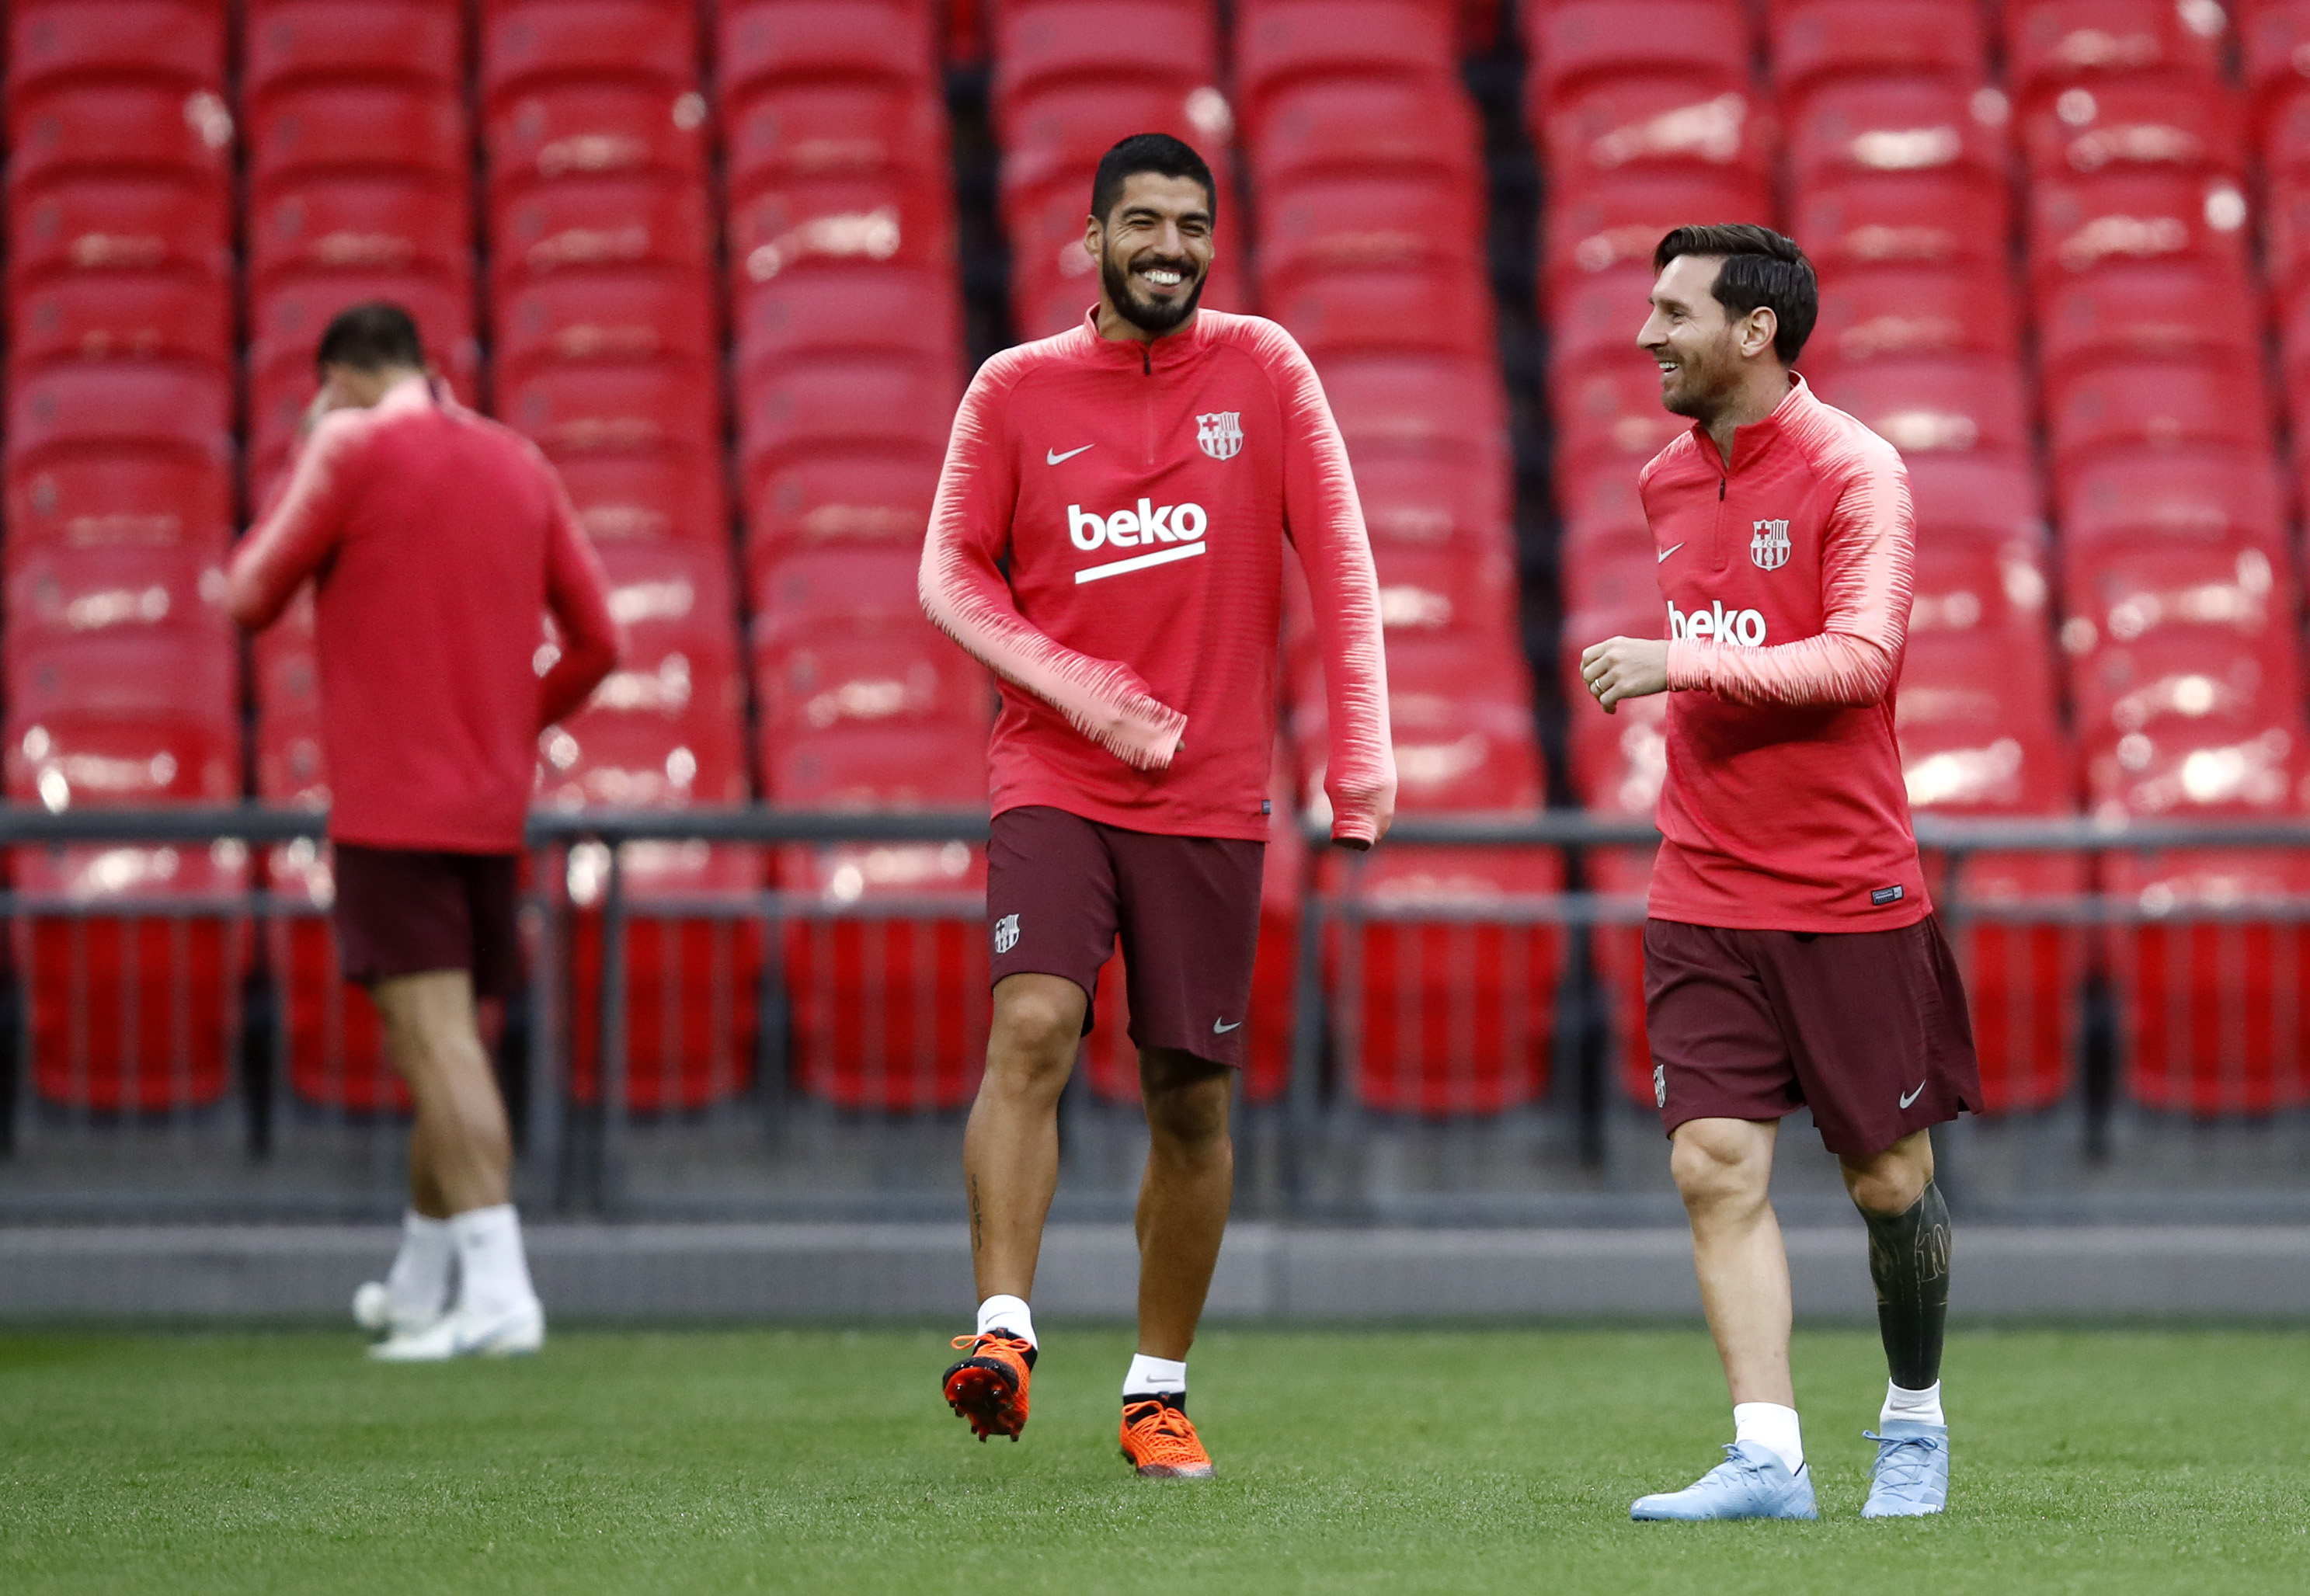 LONDON, ENGLAND - OCTOBER 02:  Luis Suarez of Barcelona speaks with Lionel Messi of Barcelona during a training session prior to the UEFA Champions League Group B match between Tottenham Hotspur and Barcelona at Wembley Stadium on October 2, 2018 in London, England.  (Photo by Julian Finney/Getty Images)